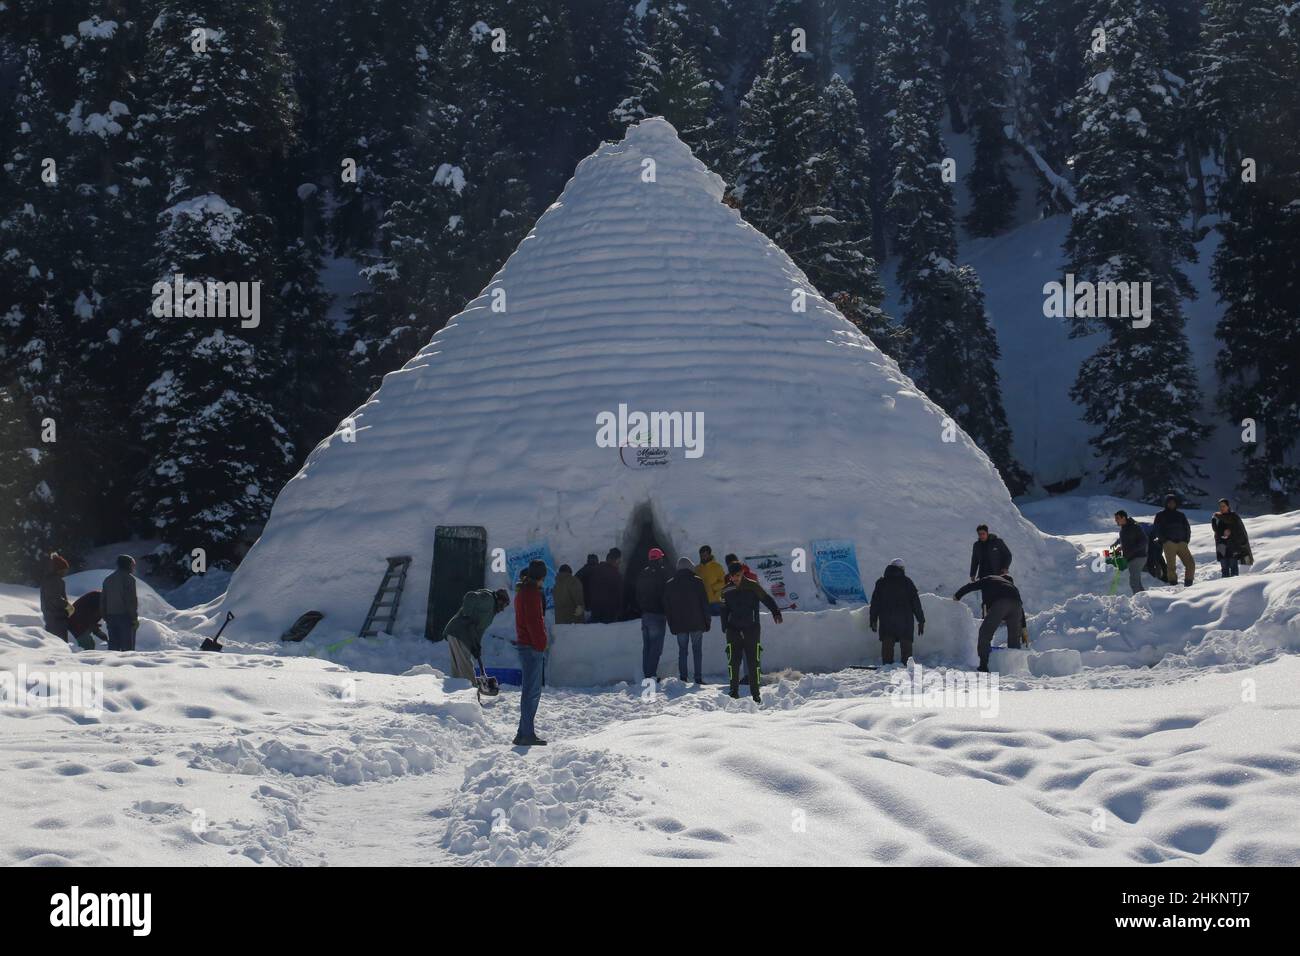 Srinagar, India. 05th Feb, 2022. A Outside view of Asia's biggest Igloo café in famous ski resort gulmarg. The Igloo Cafe is approximately 37.5 feet tall and 45 feet round and can accommodate fifteen tables and around 60 guests. The Igloo Cafe offers tables made of ice and snow, with hot dishes served to visitors. (Photo by Sajad Hameed/Pacific Press) Credit: Pacific Press Media Production Corp./Alamy Live News Stock Photo